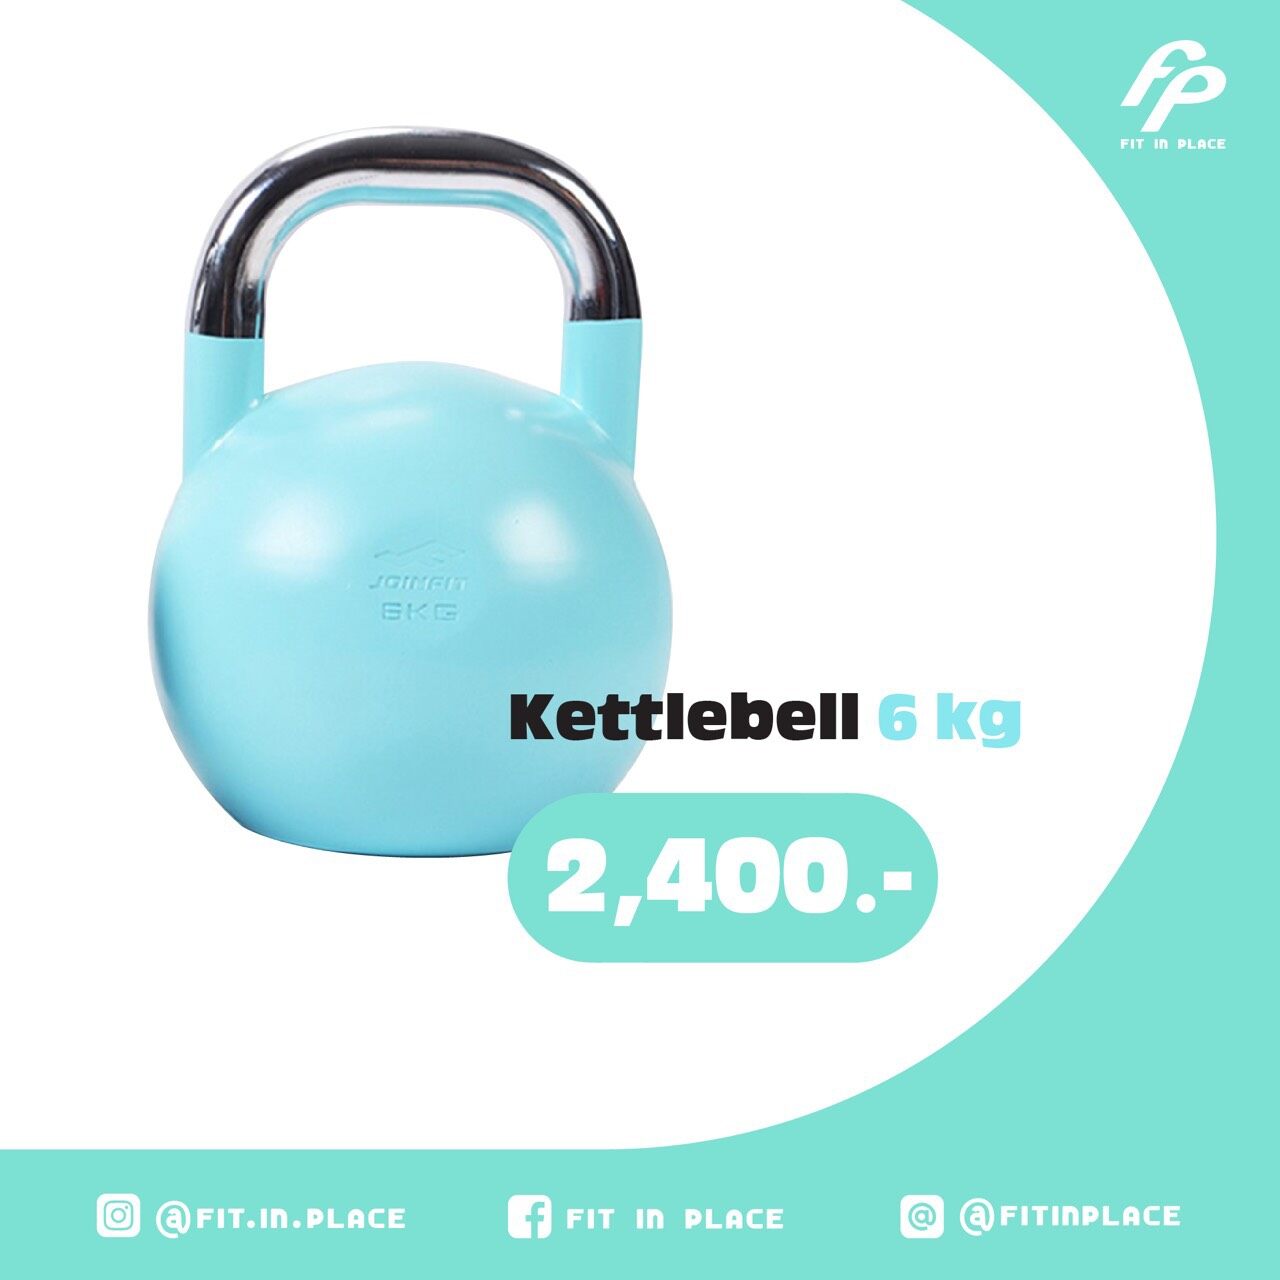 Fit in Place - Joinfit Kettlebell 6kg